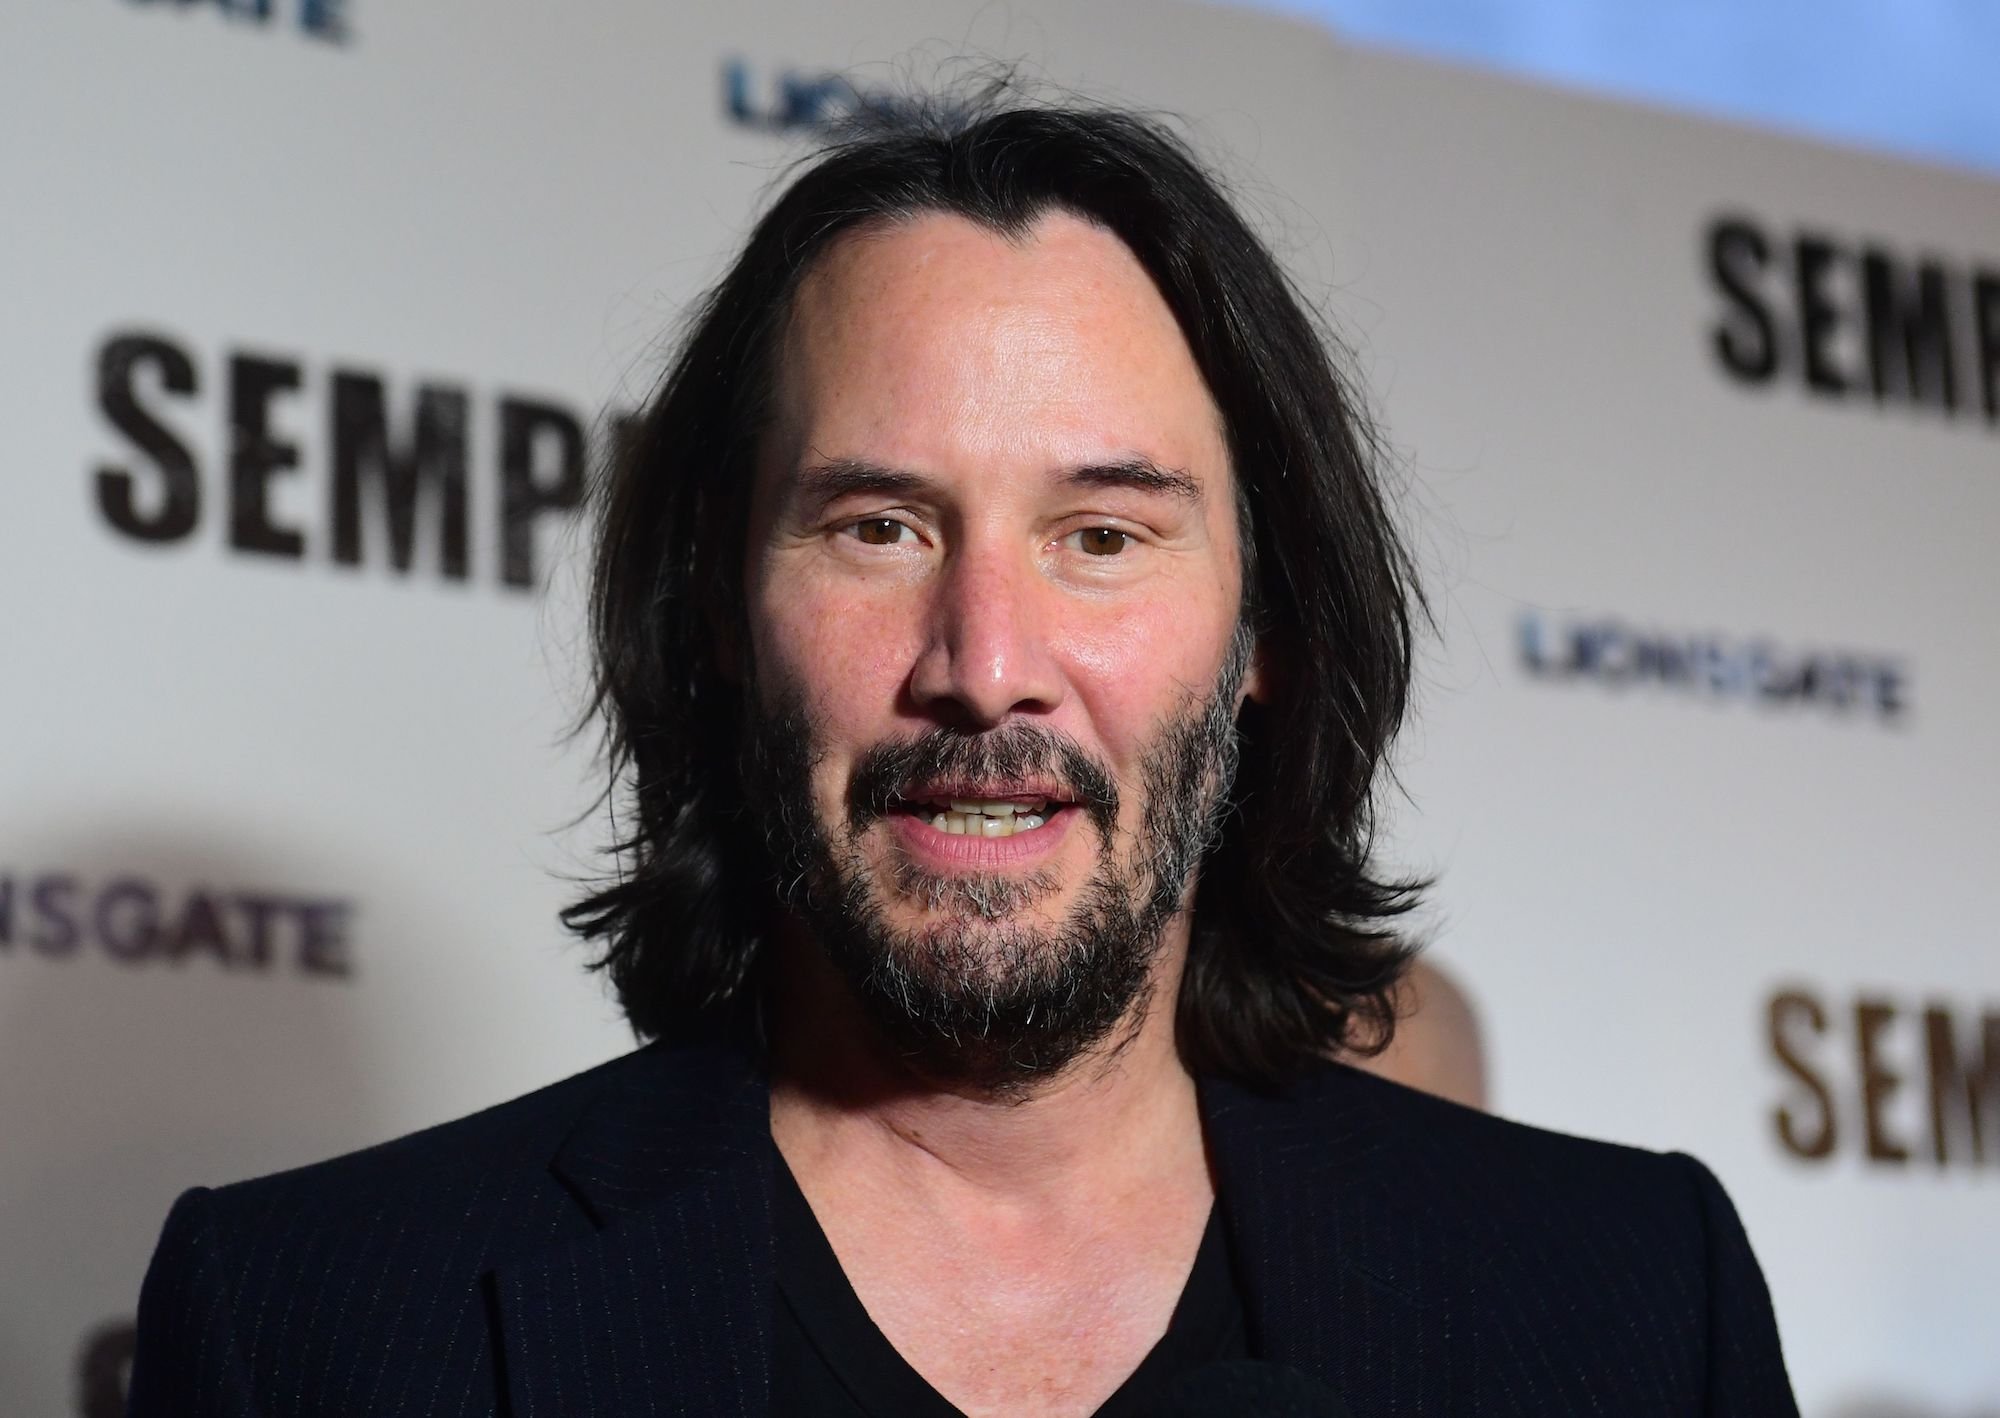 Keanu Reeves Thrives Being a Loner and Doesn't Want Fans thinking He's Lonely